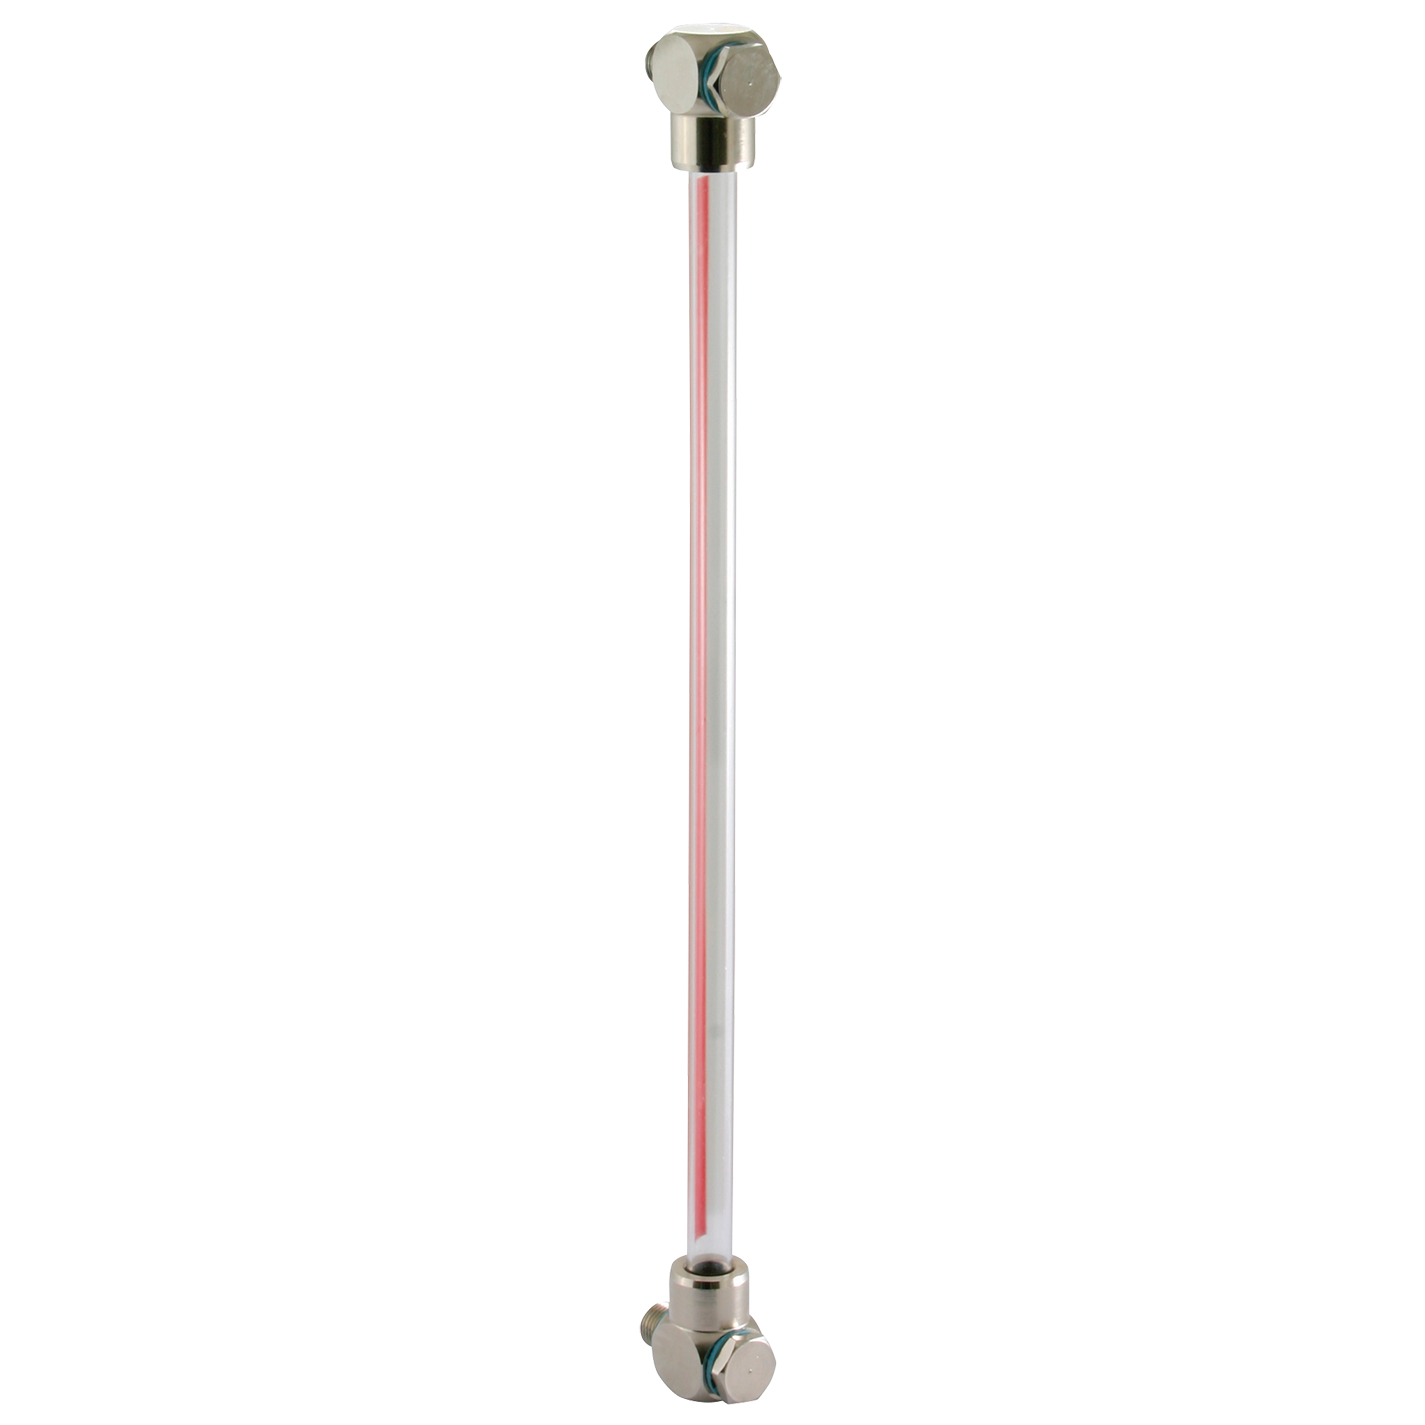 1/2" BSP Fluid Level Gauge W/O Thermometer Centres 350mm